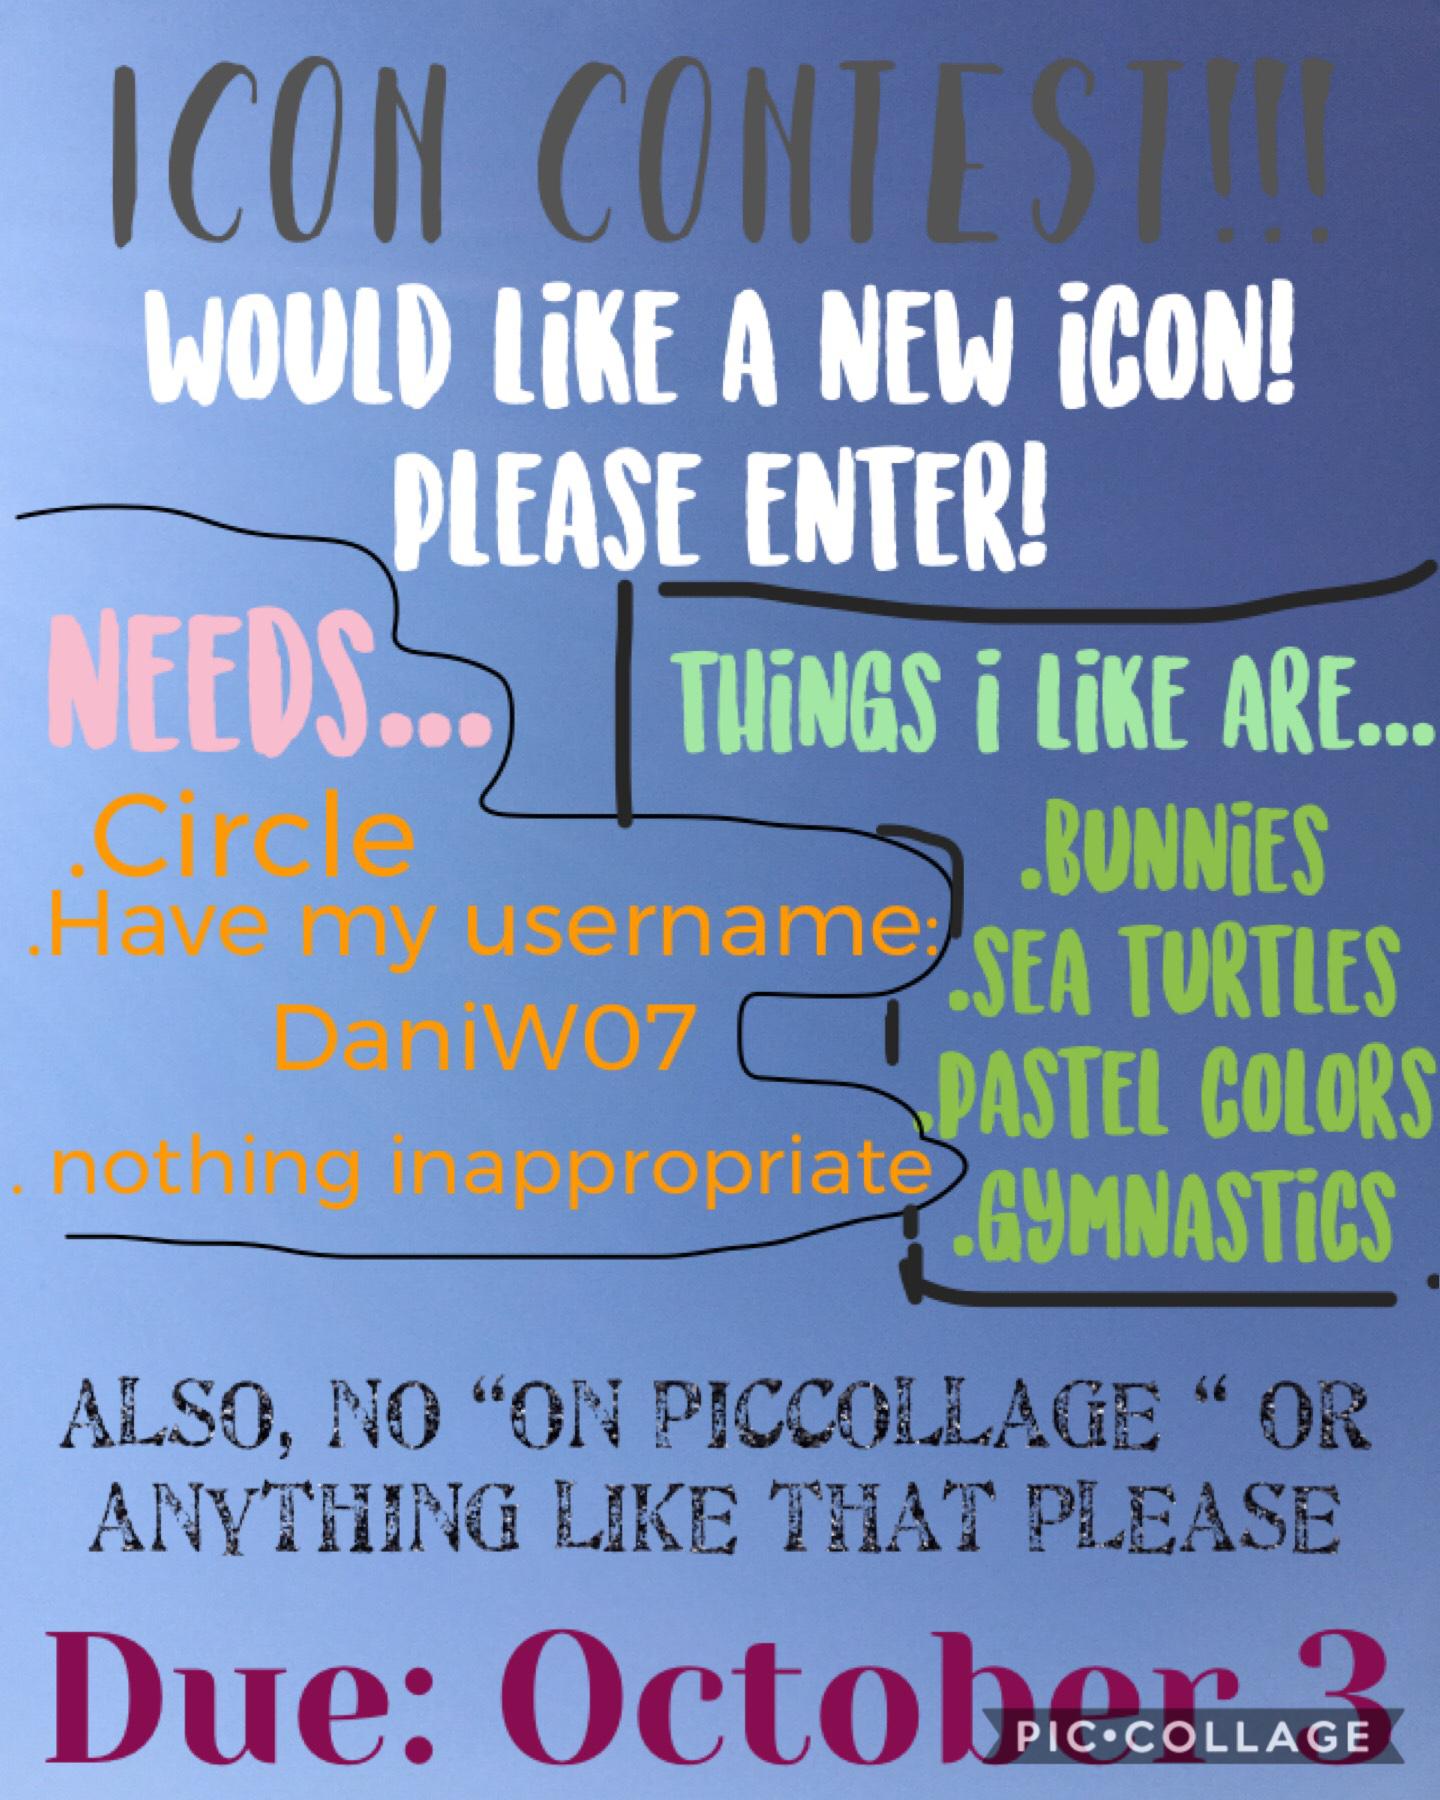 ICON CONTEST!!! Please enter, due October 3rd!
=background picture taken by me = lol